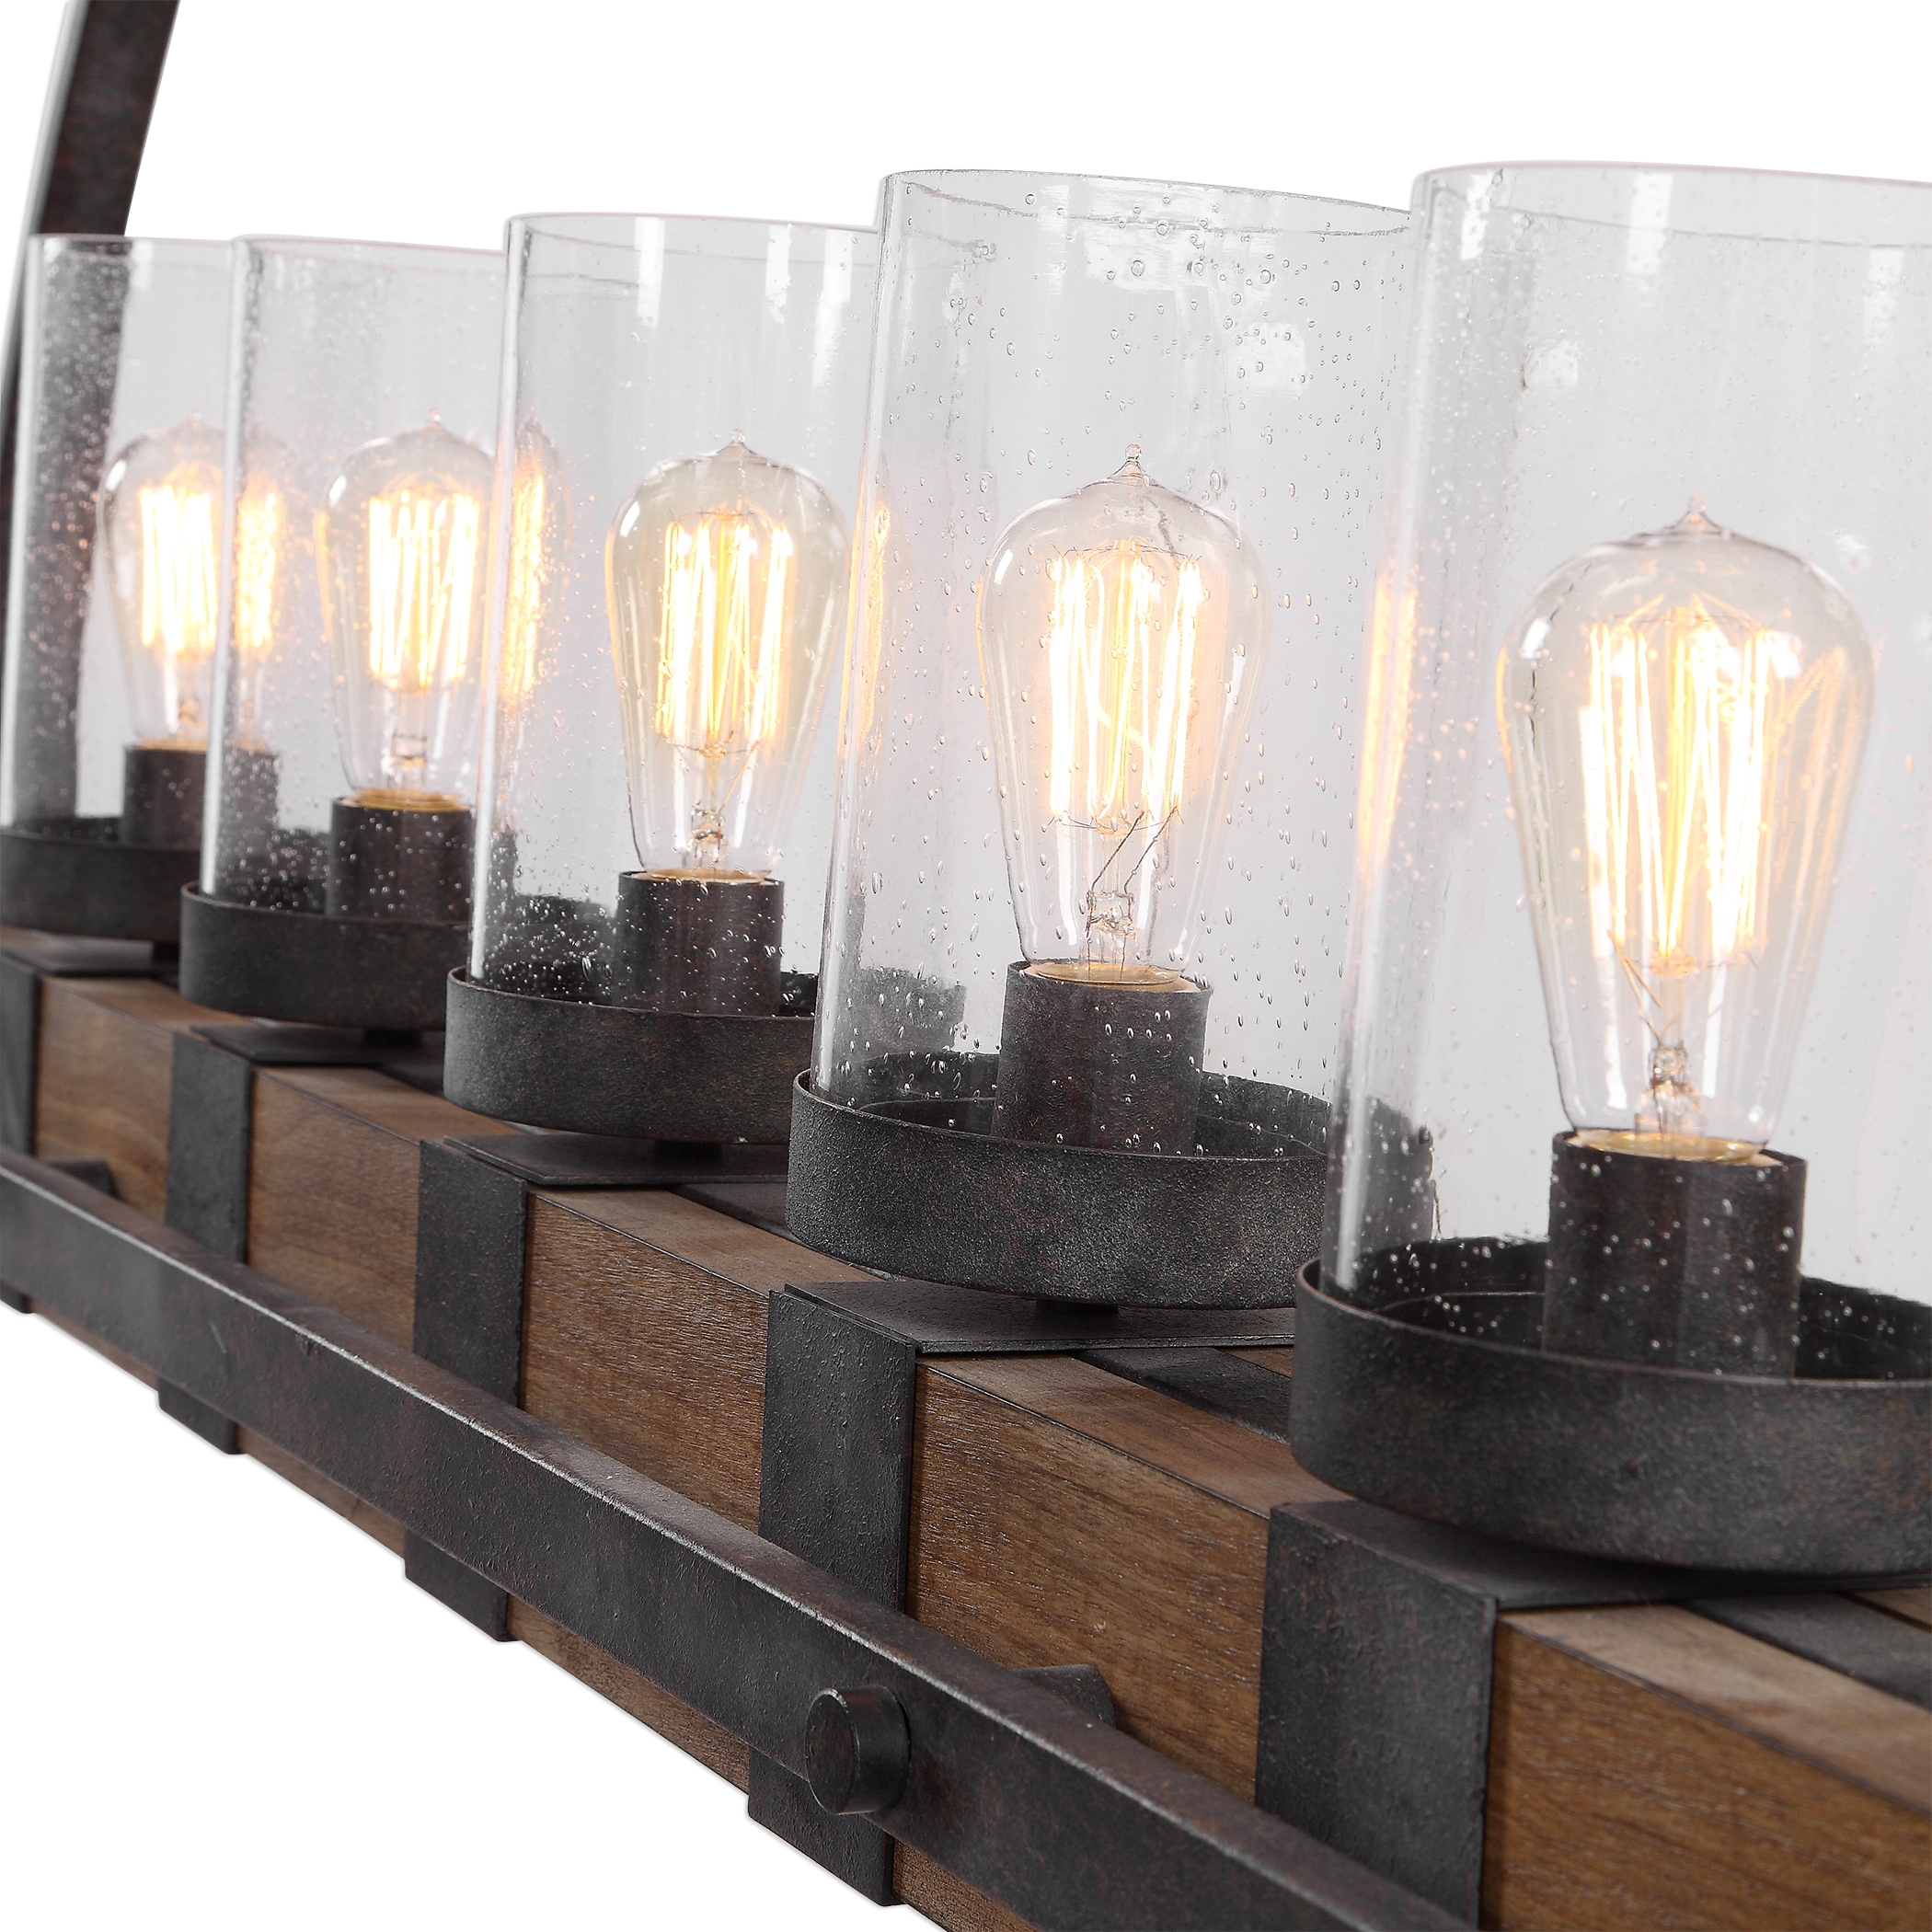 Atwood Rustic Linear Chandelier, 5 Light - Image 3